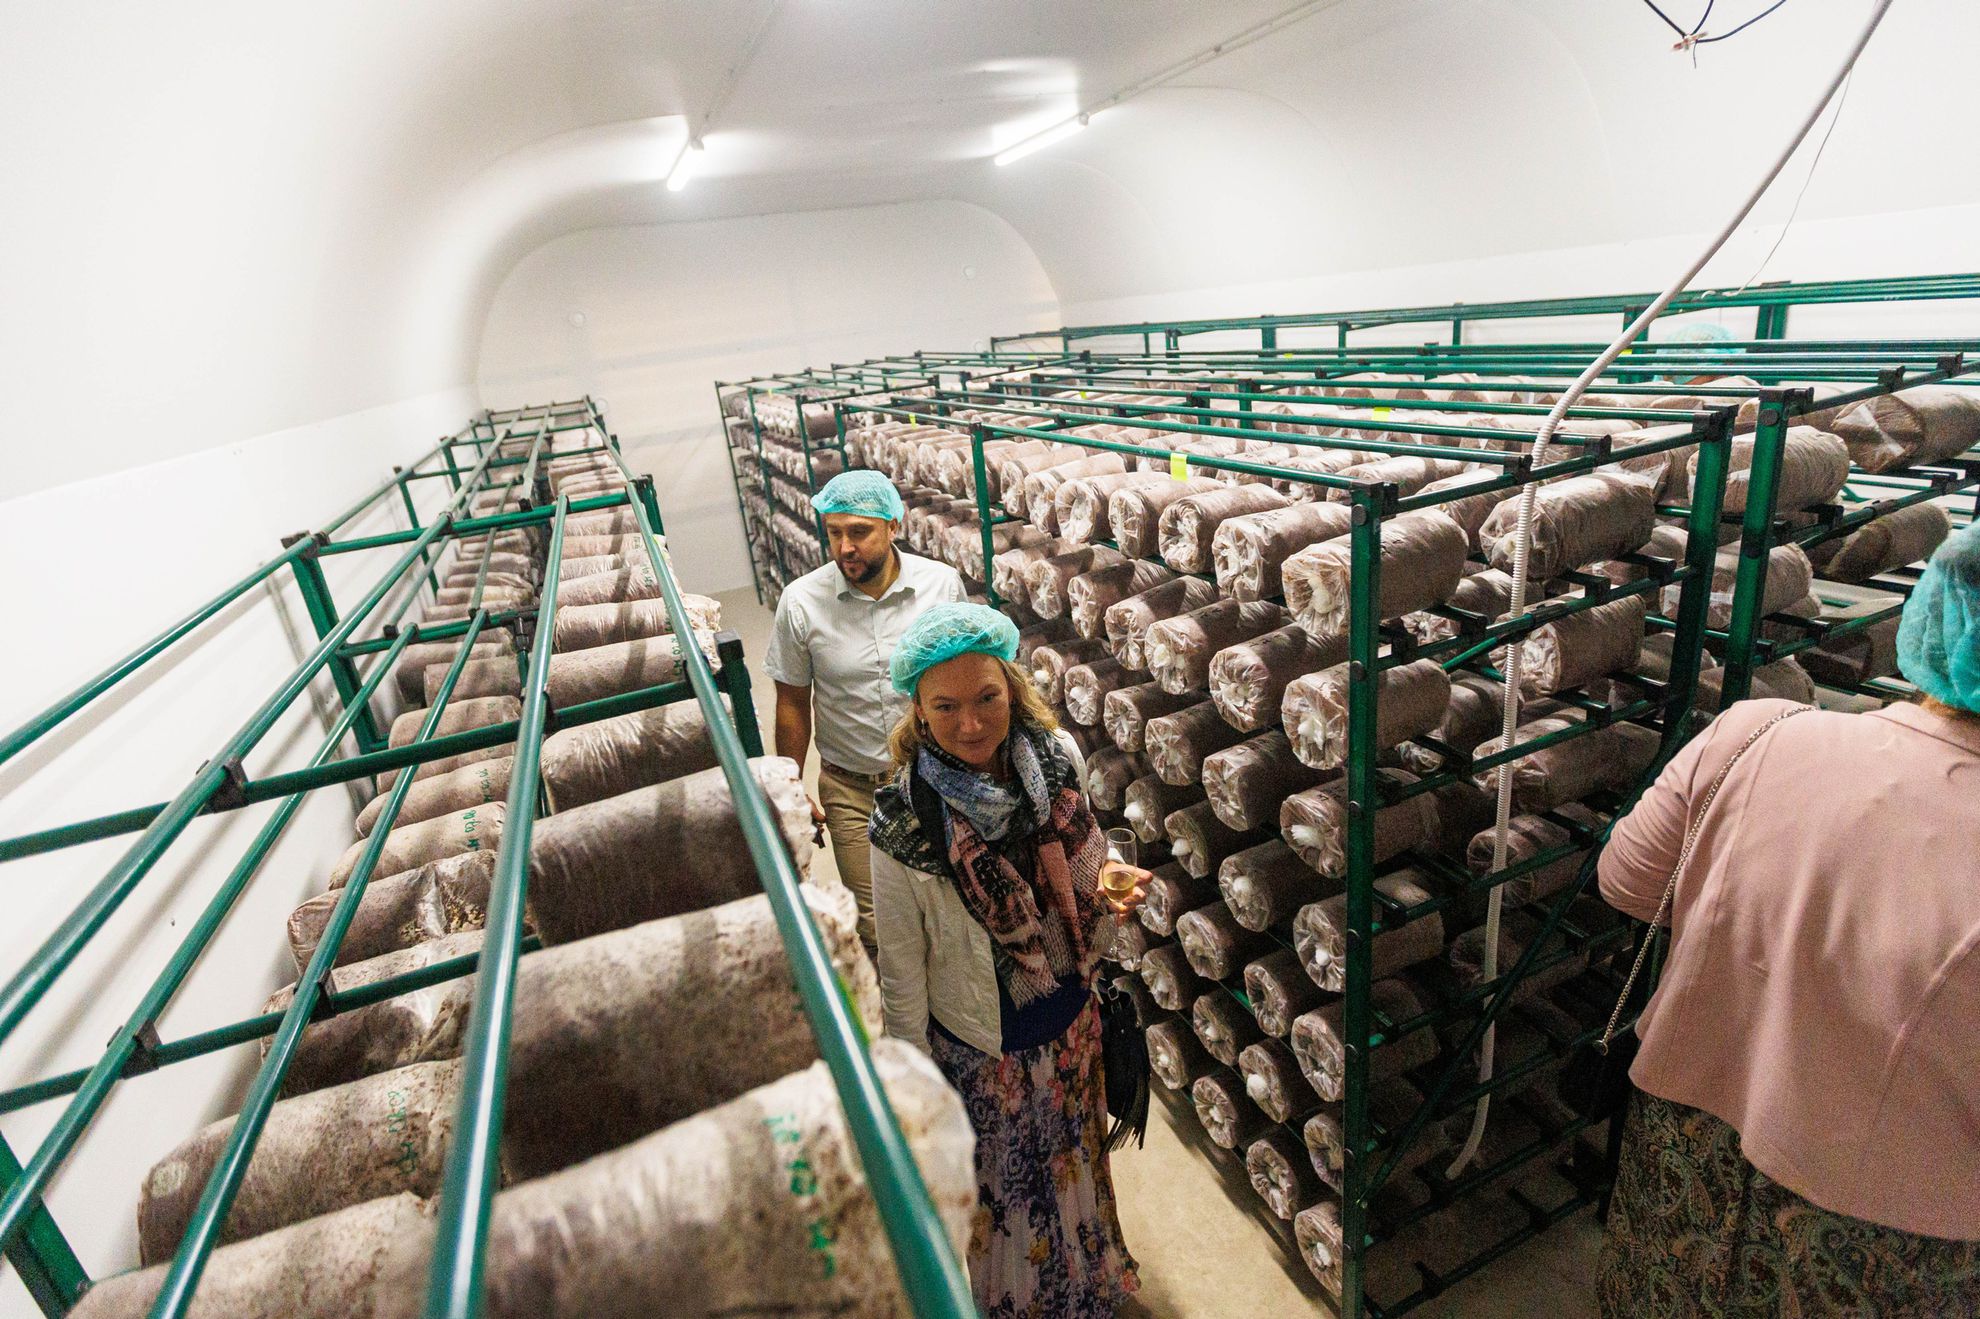 Shroomwell opened one of the largest Medicinal mushroom farms in Tõrva, Estonia on 25th of August